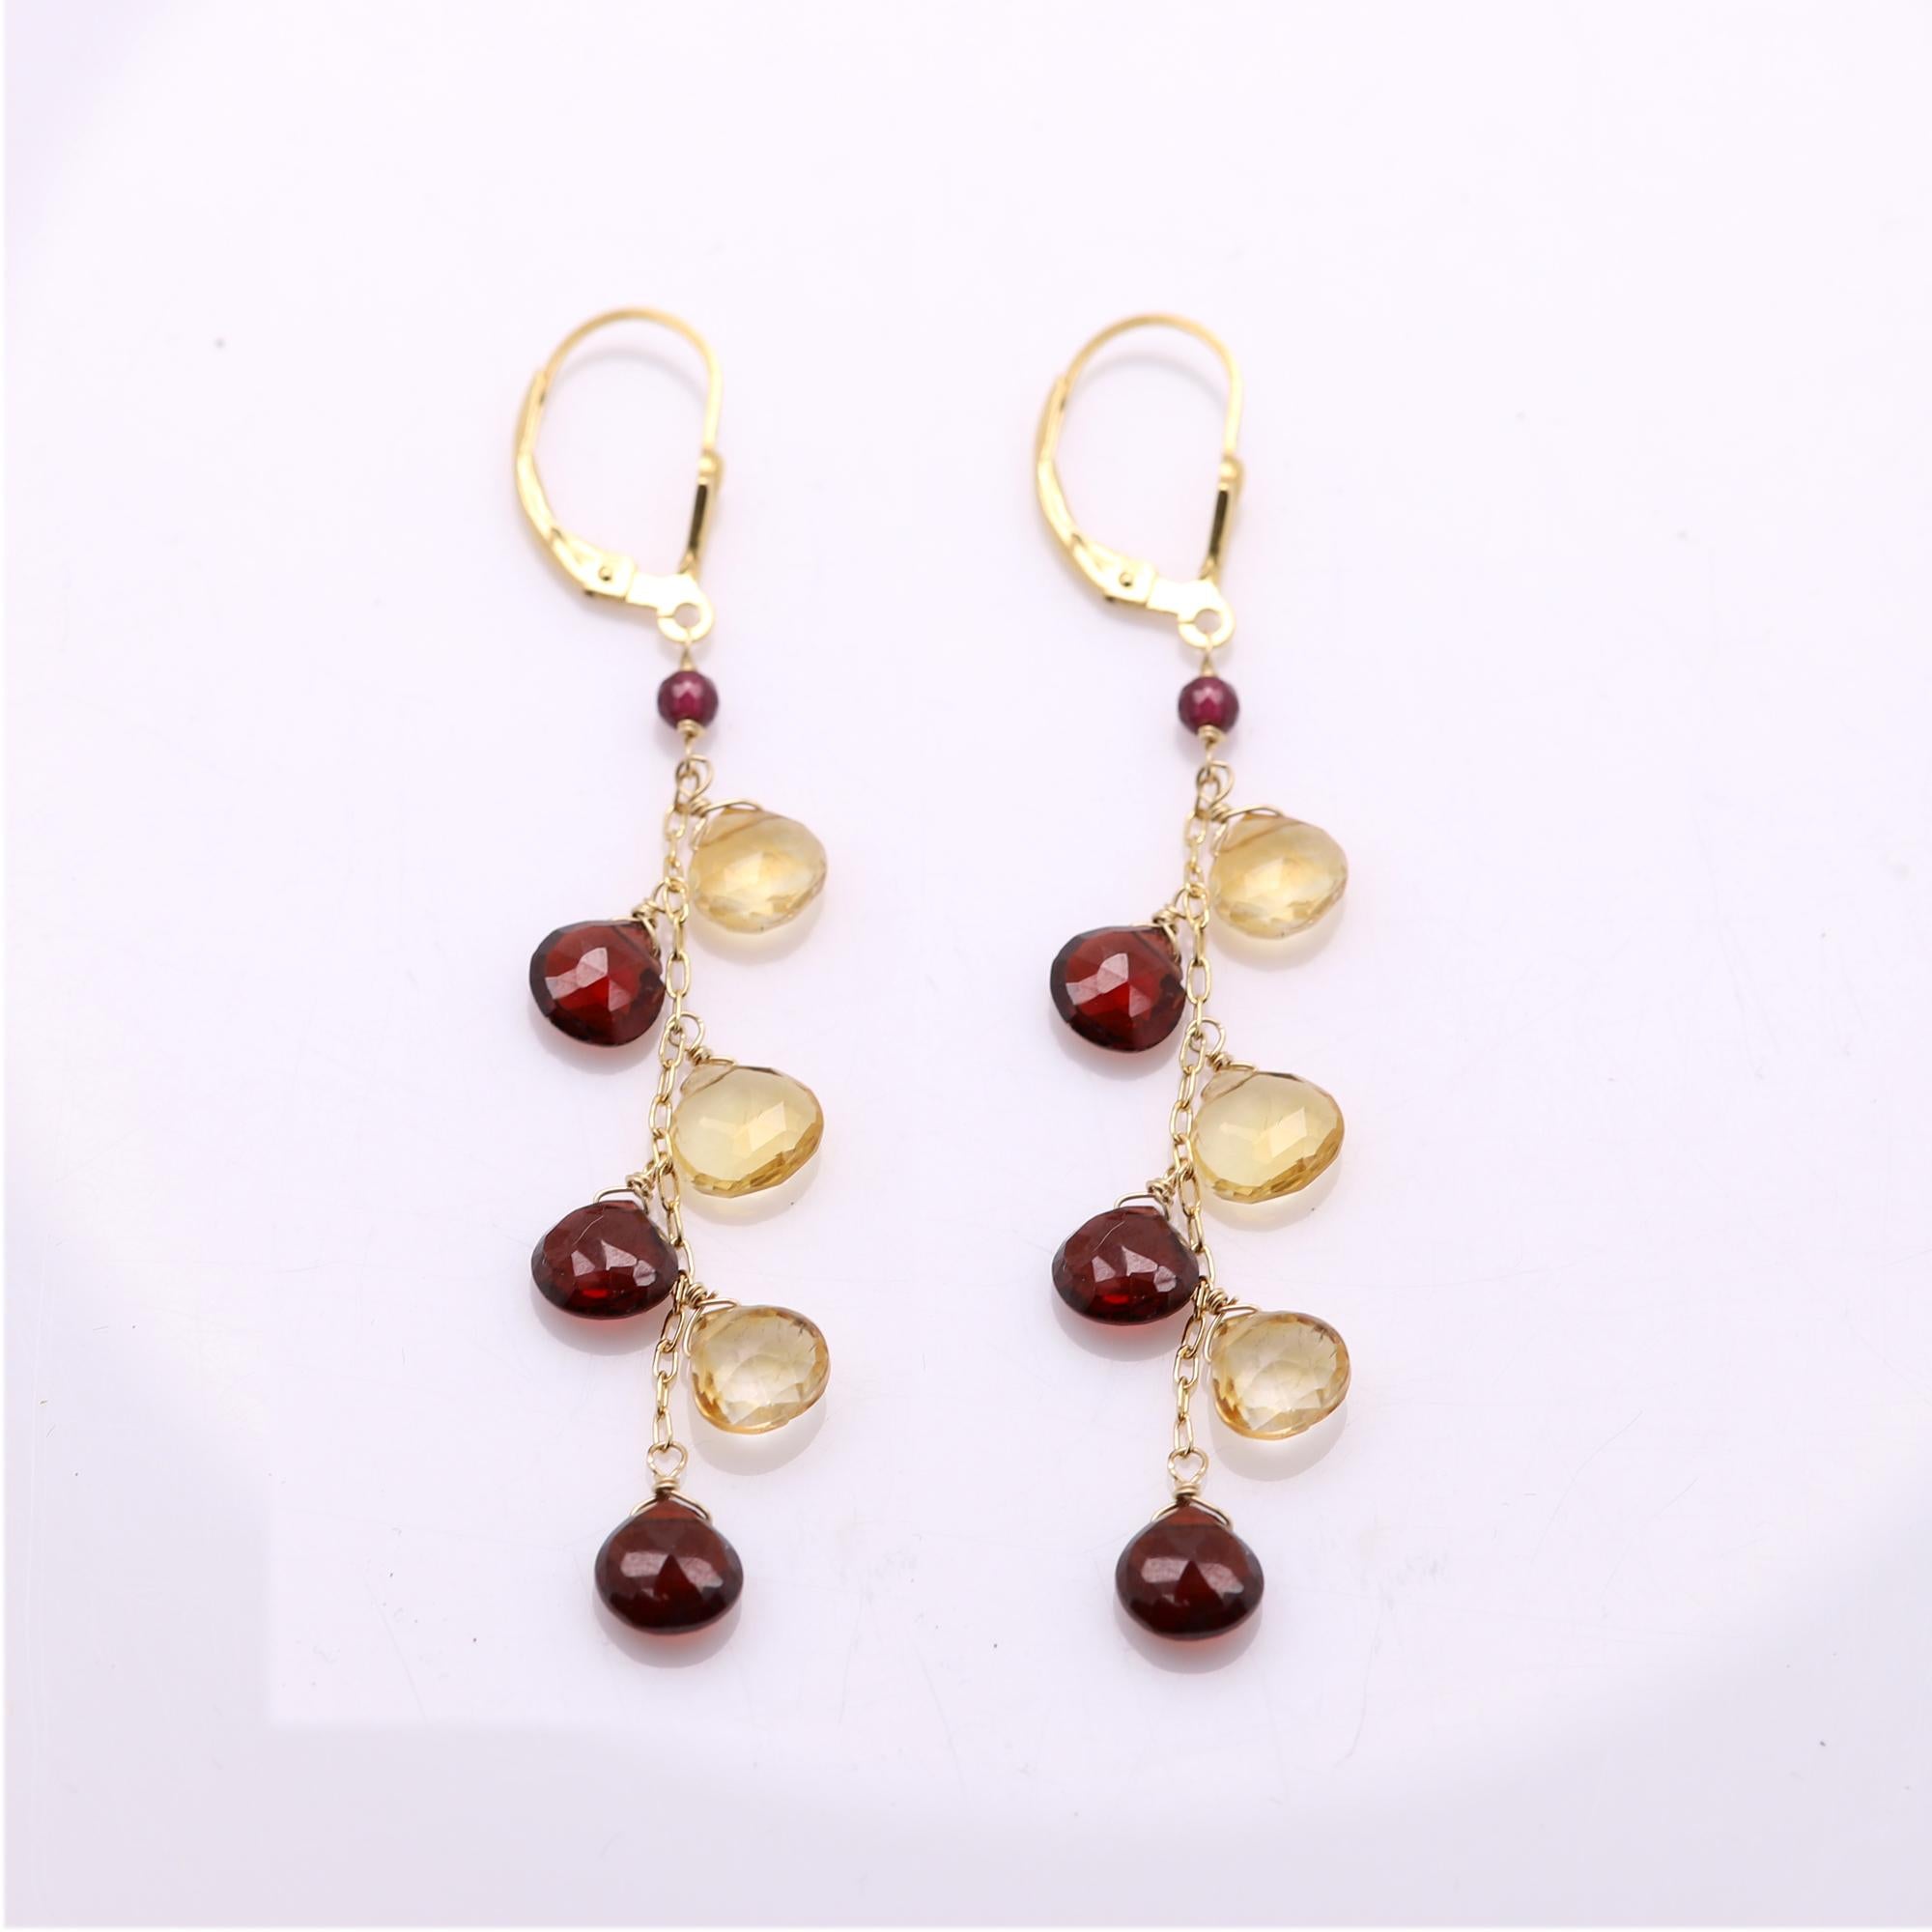 New Brilliant Elegant Dangling Earrings for Woman and Girls.
Approx. 2.5